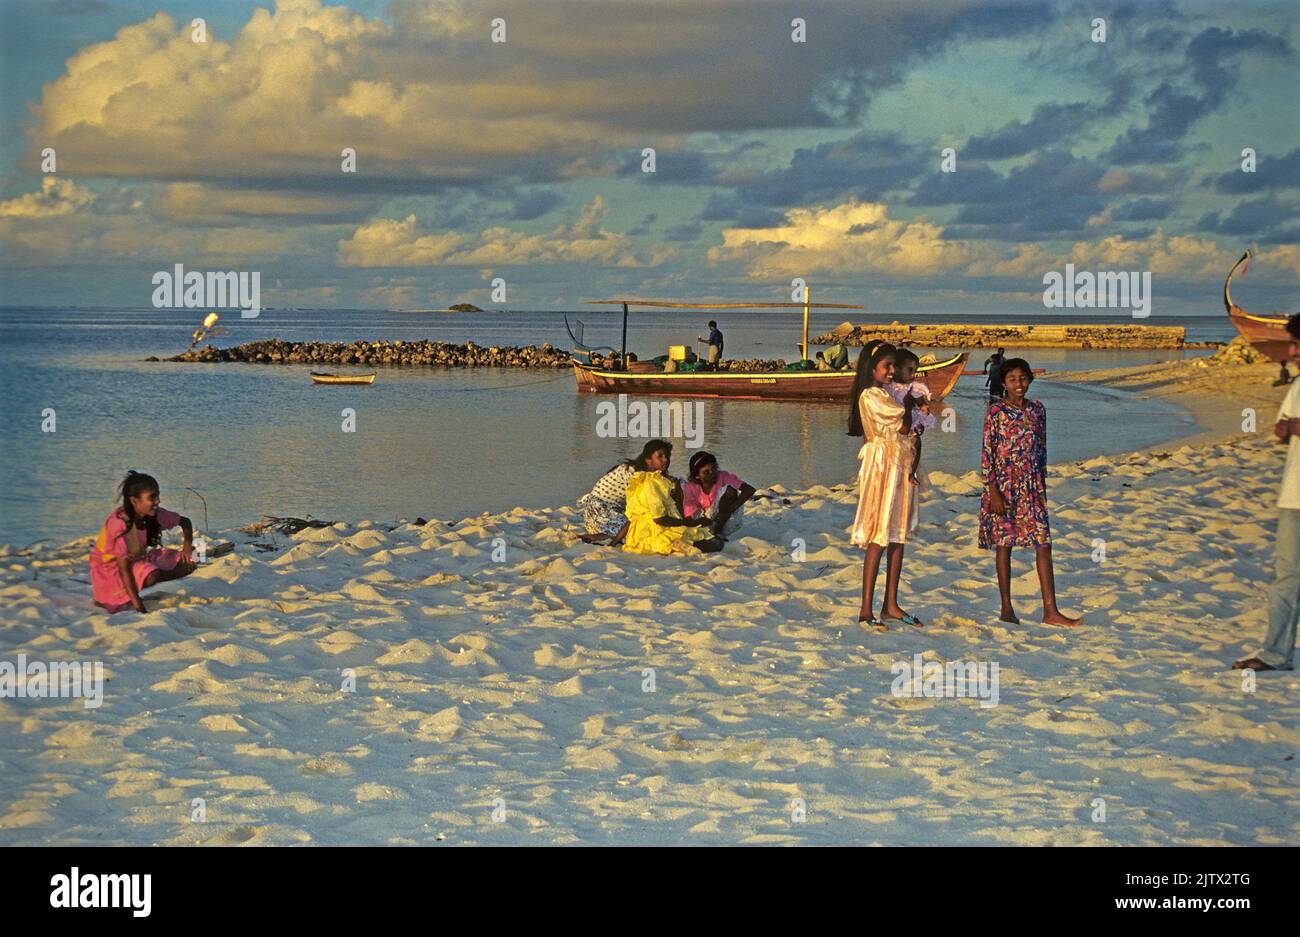 Young girls at the beach, sunset, home island Mahembadhoo, Maldives, Indian ocean, Asia Stock Photo